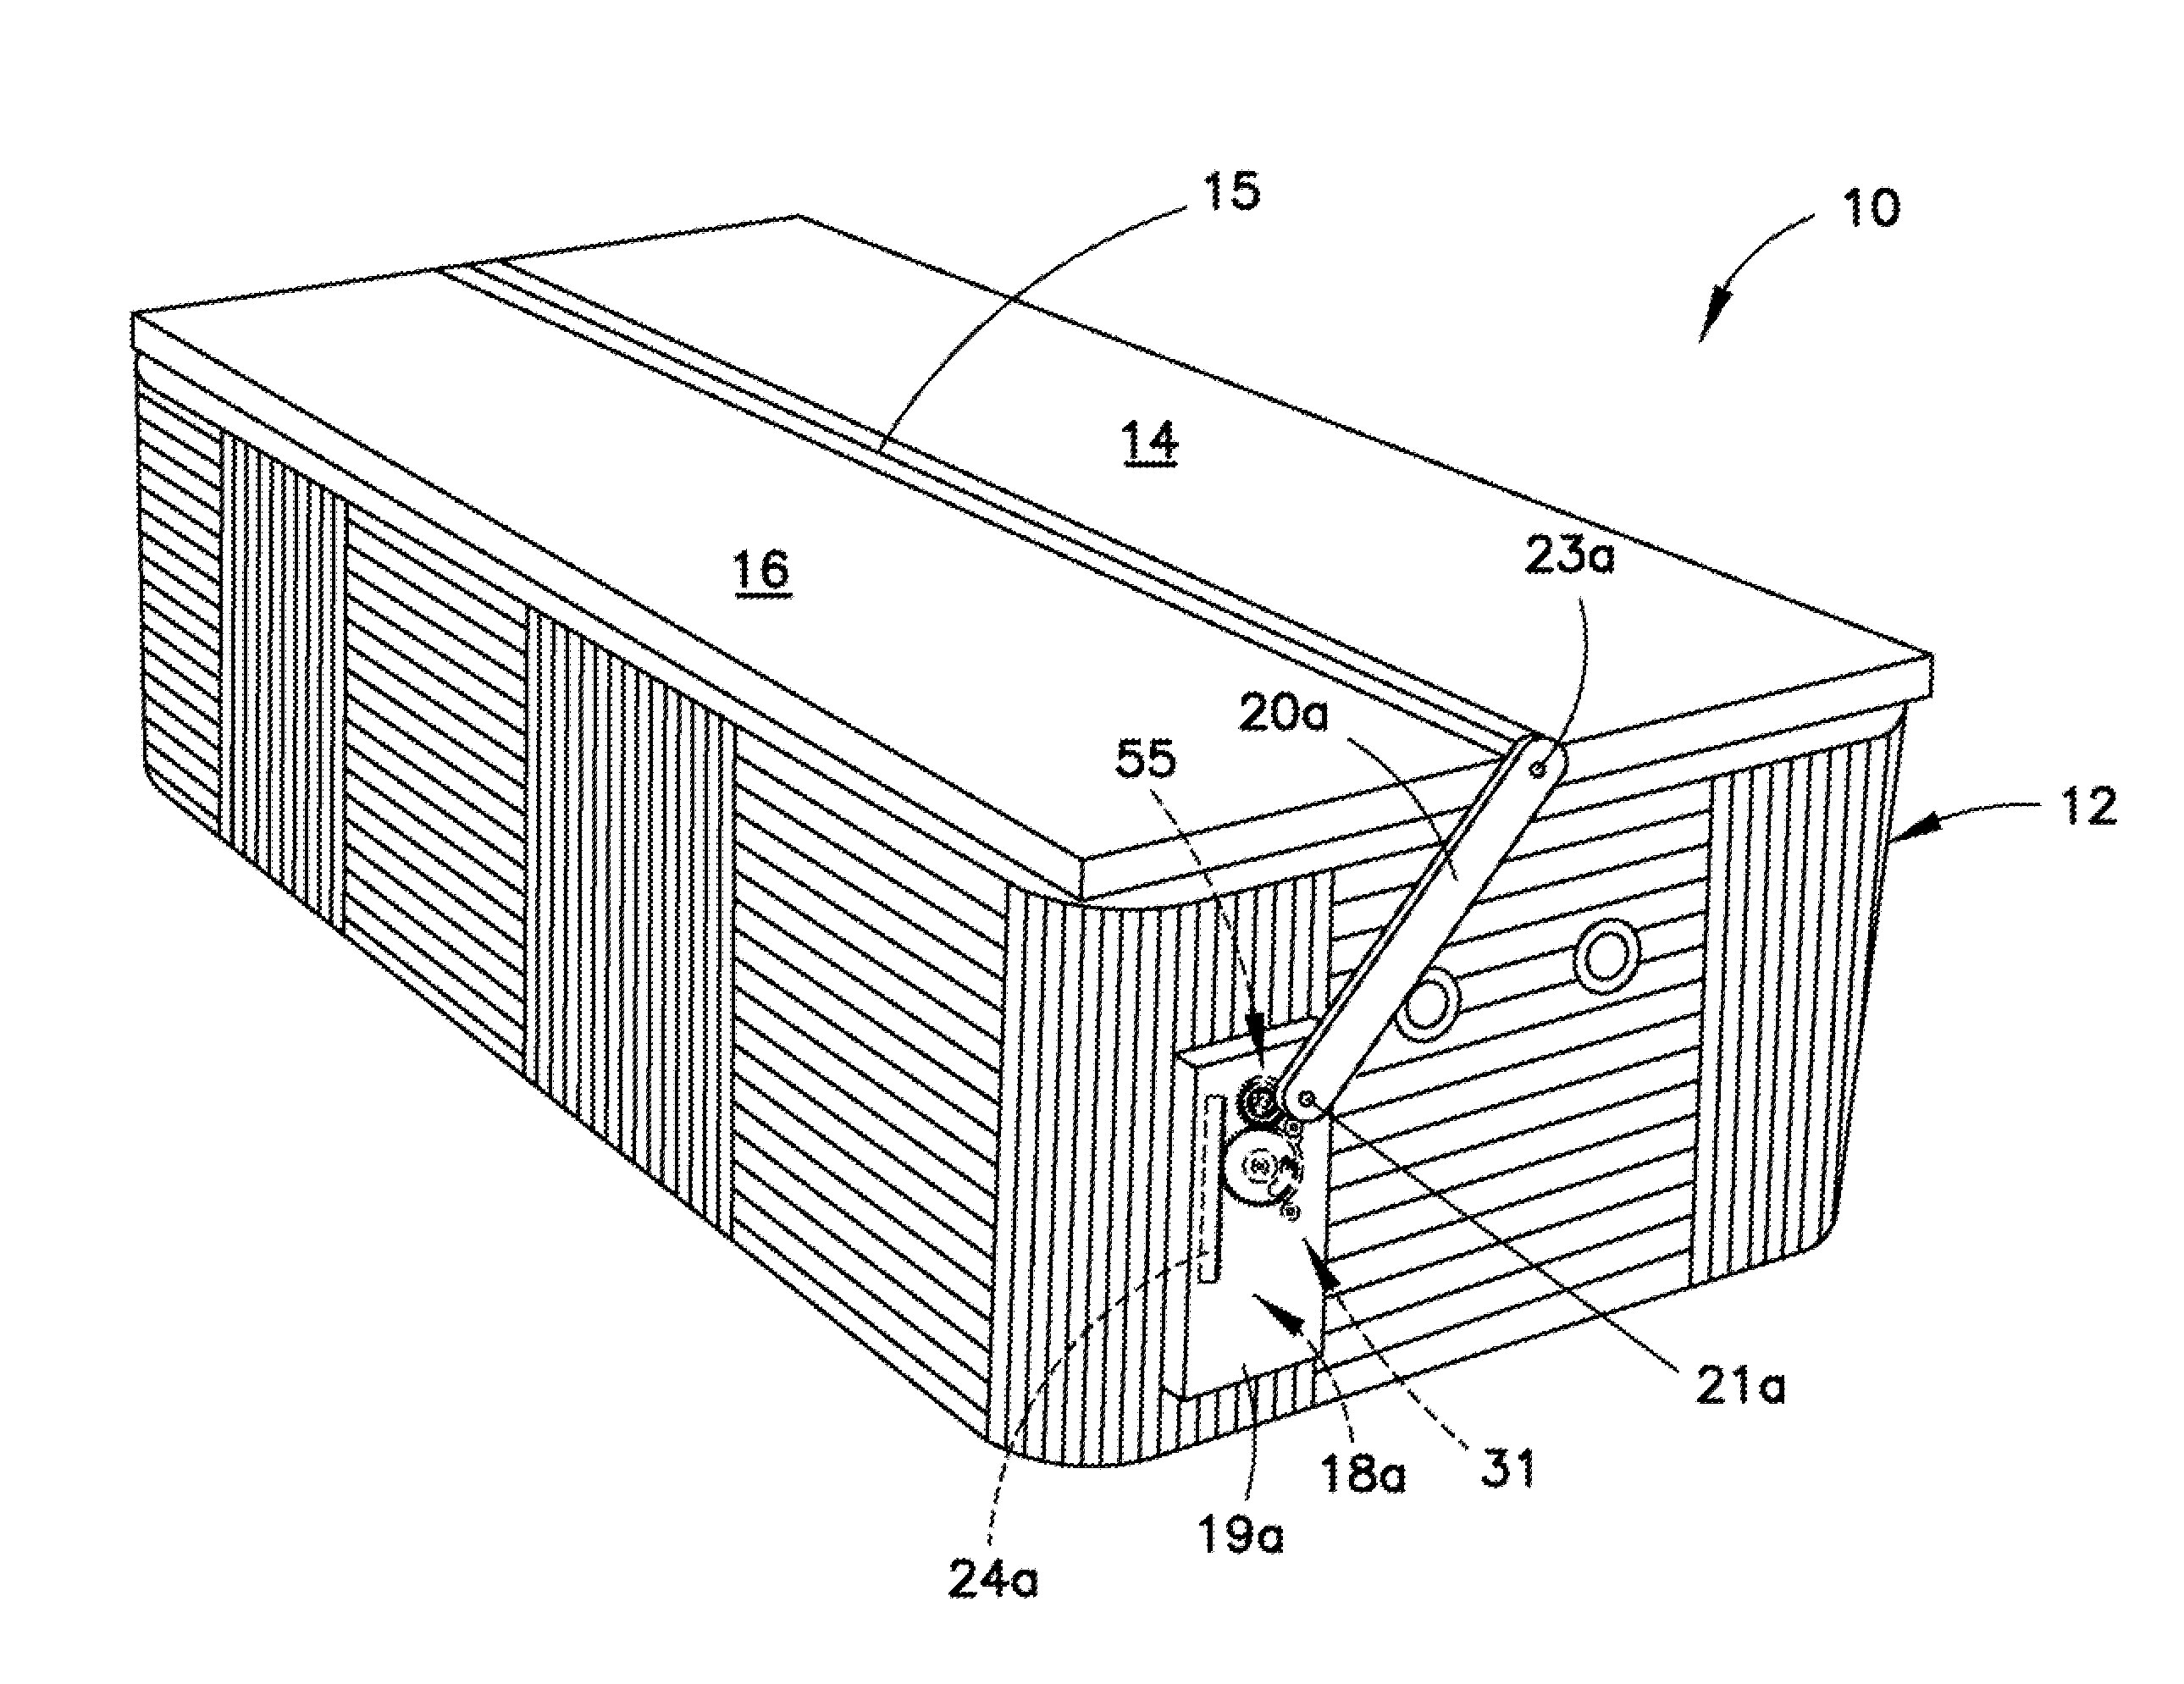 System for automatically opening and closing a two-part hinged cover for a swim spa